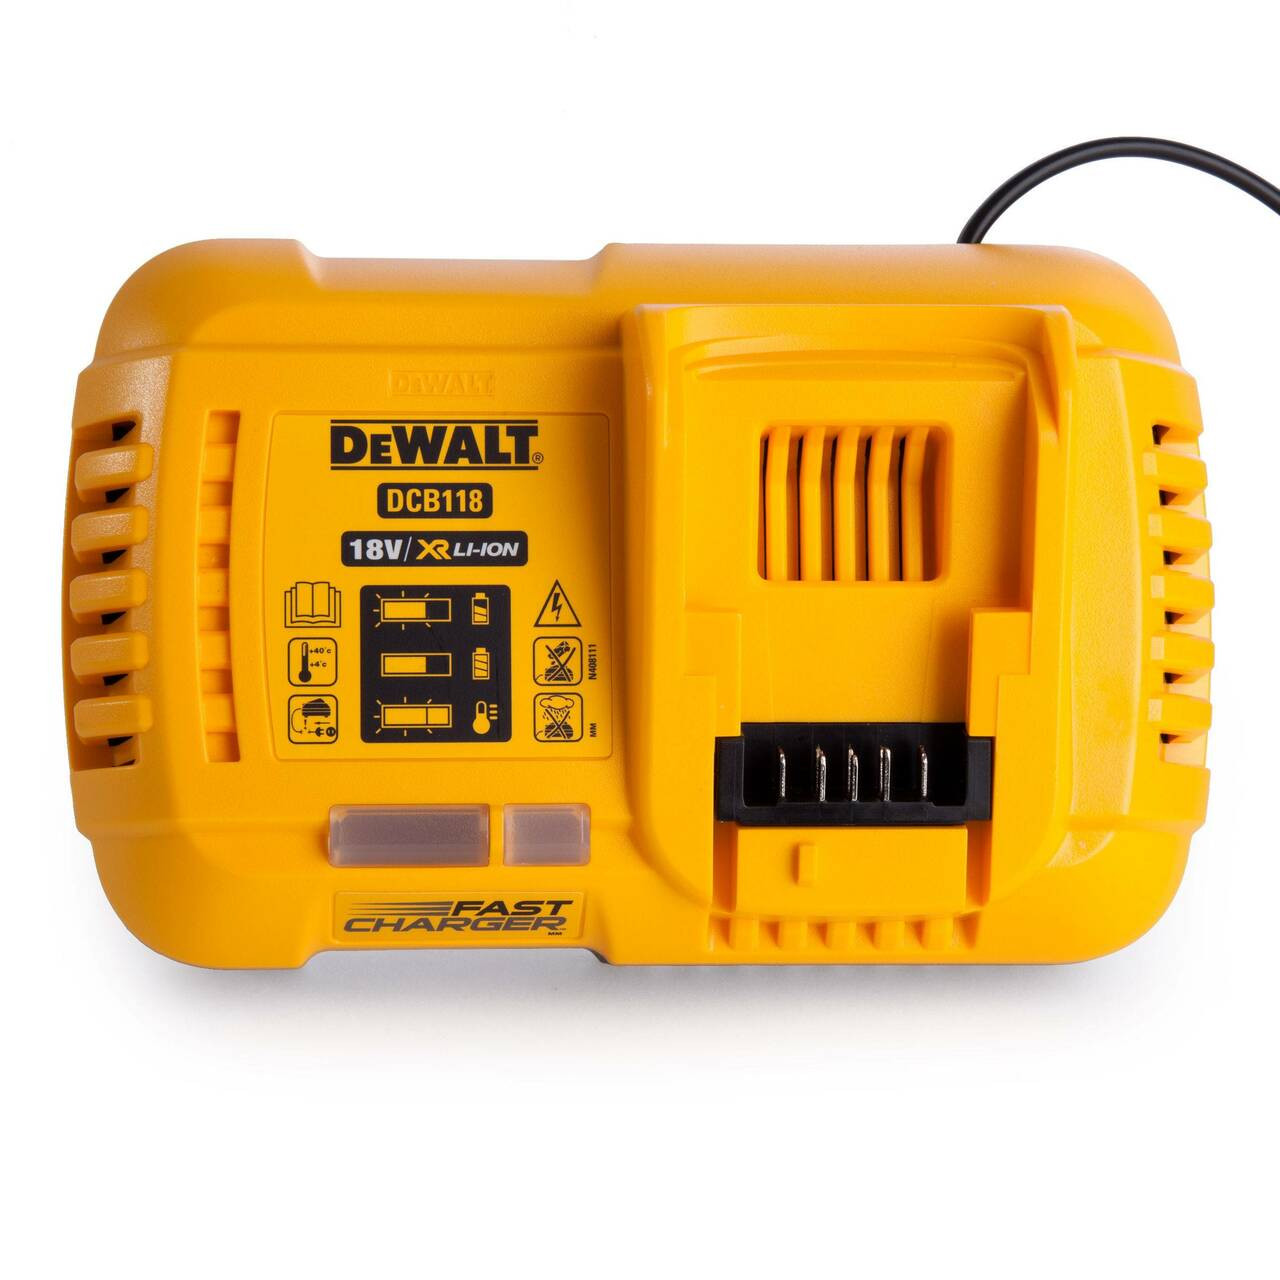 DeWalt 20V Max Fan Cooled Fast Charger DCB118 Chas. E. Phipps